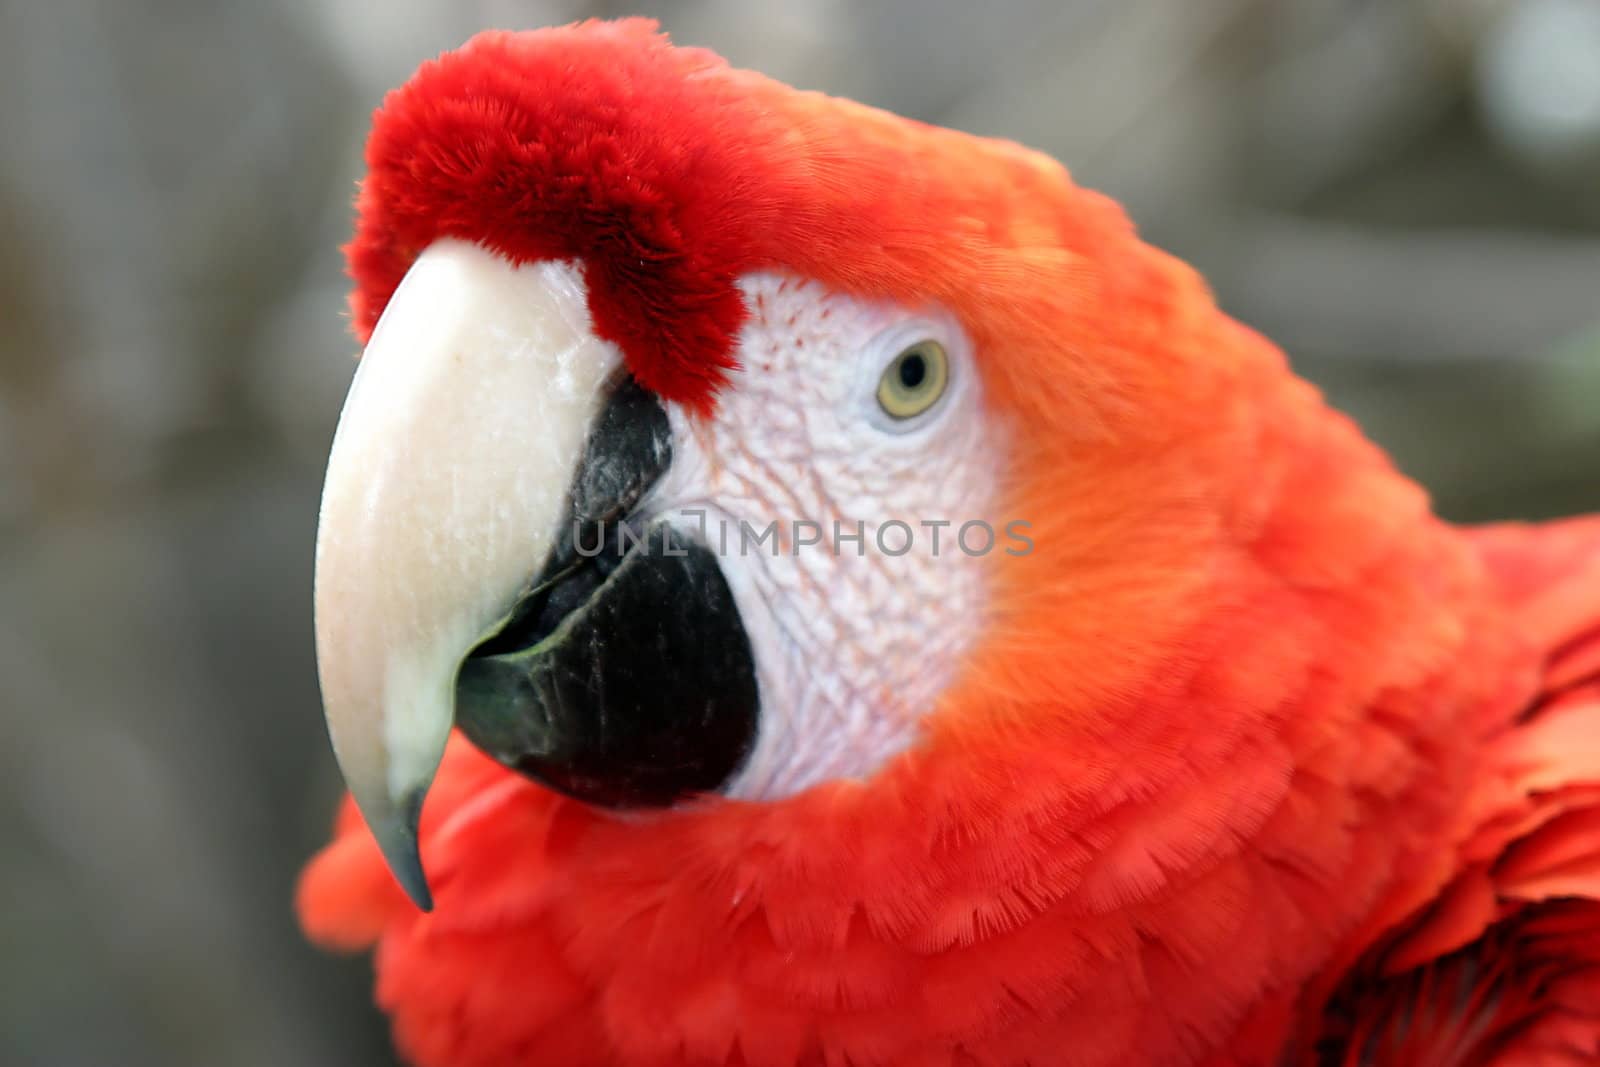 The Scarlet Macaw is a large colorful parrot.